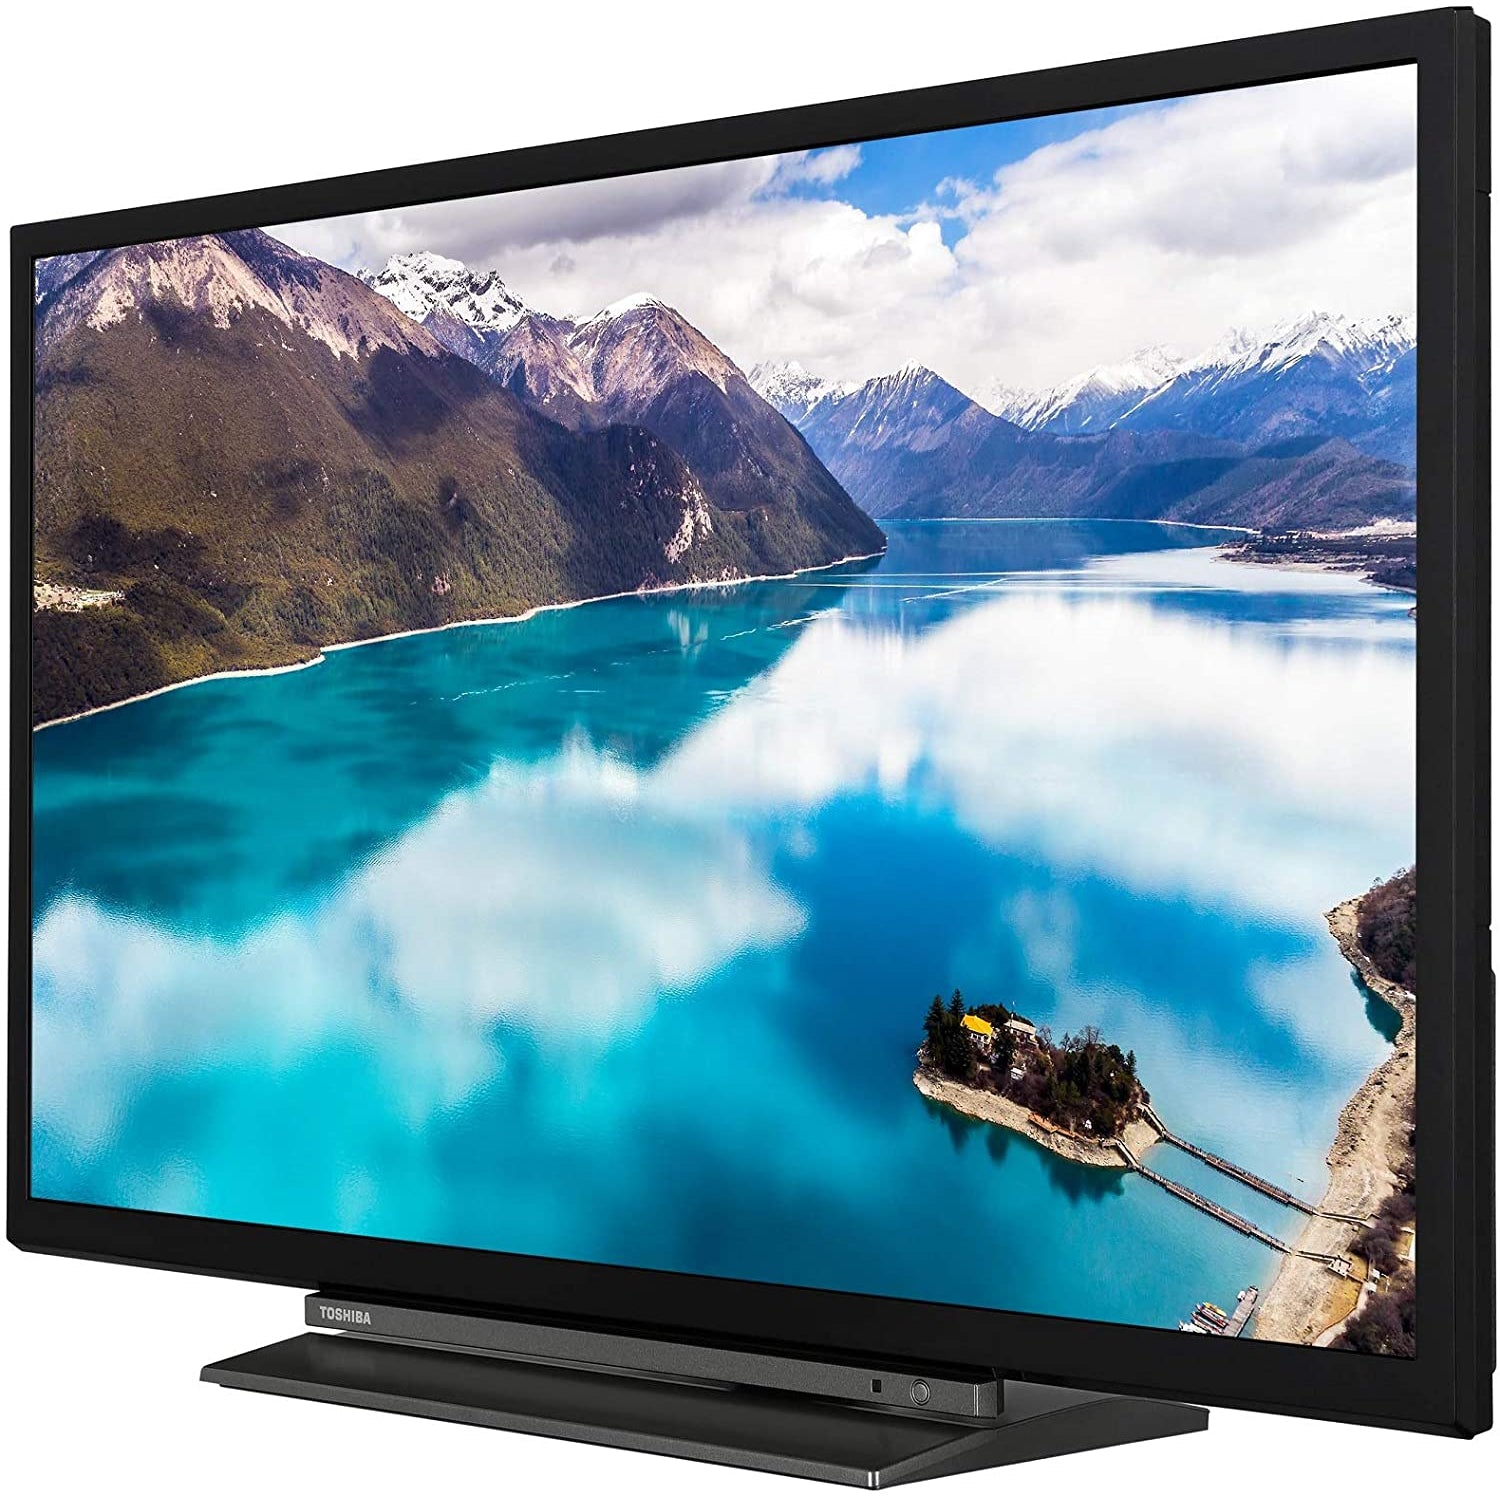 Toshiba 32LL3A63DB 32-Inch Smart Full-HD LED TV with Freeview Play - Black